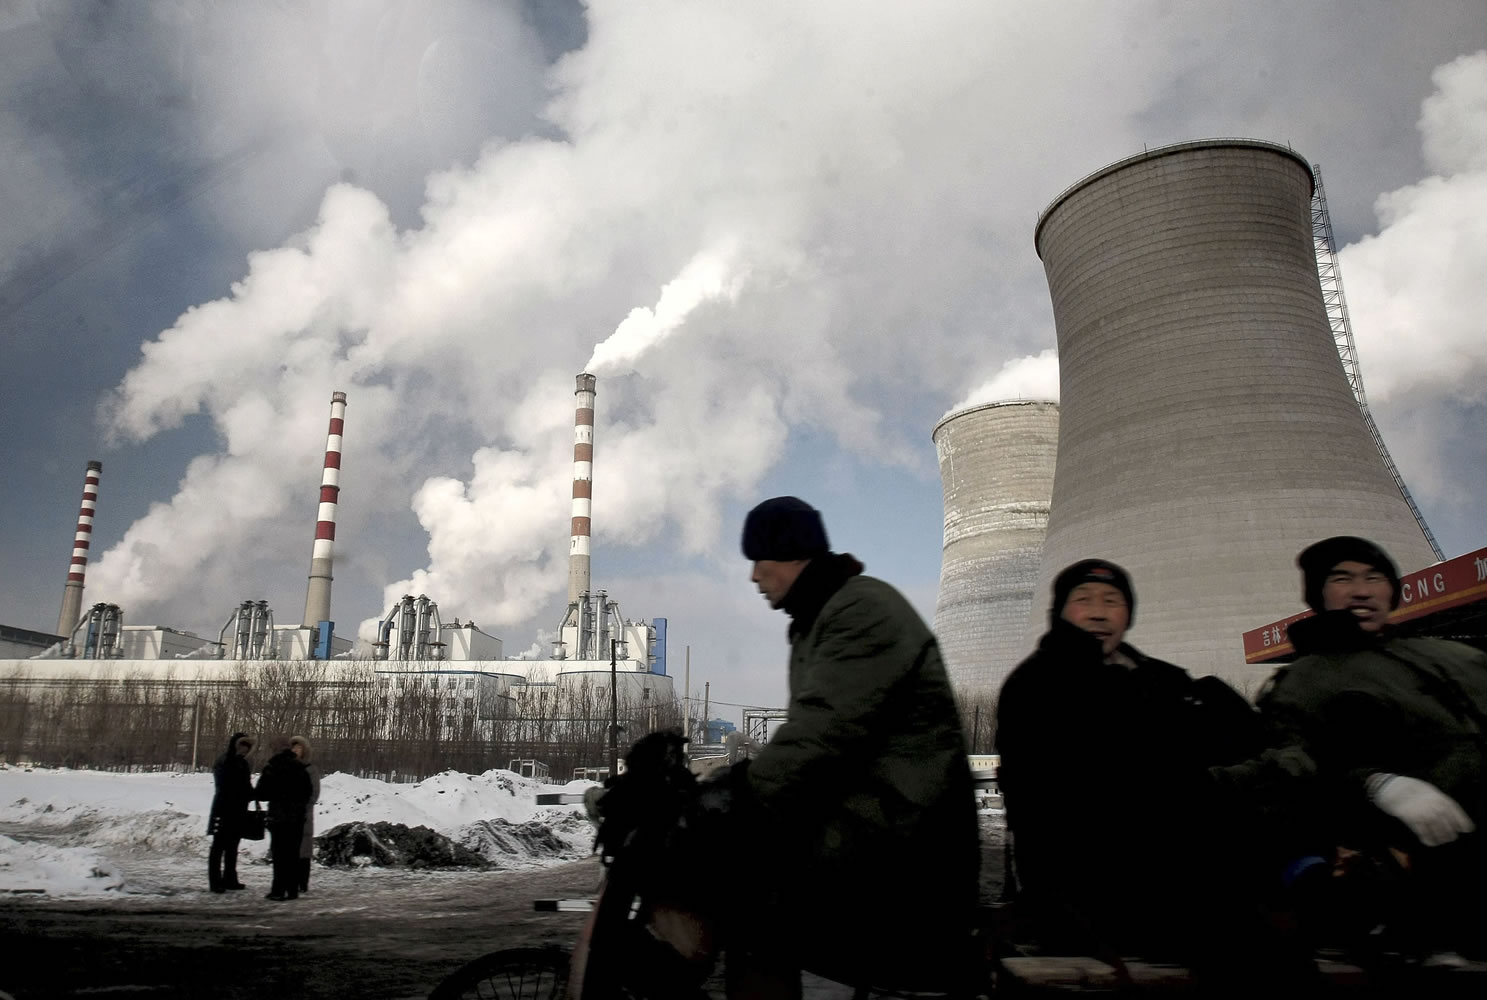 Workers cycle past a coal-fired power plant in December 2010 in Changchun, in northeast China's Jilin province. The world's emissions of heat-trapping carbon dioxide took the biggest jump on record, the U.S. Department of Energy calculated, a sign of how feeble the world's efforts are at slowing man-made global warming. The new figures for 2010 mean that levels of greenhouse gases are higher than the worst-case scenario outlined by climate change experts just four years ago.